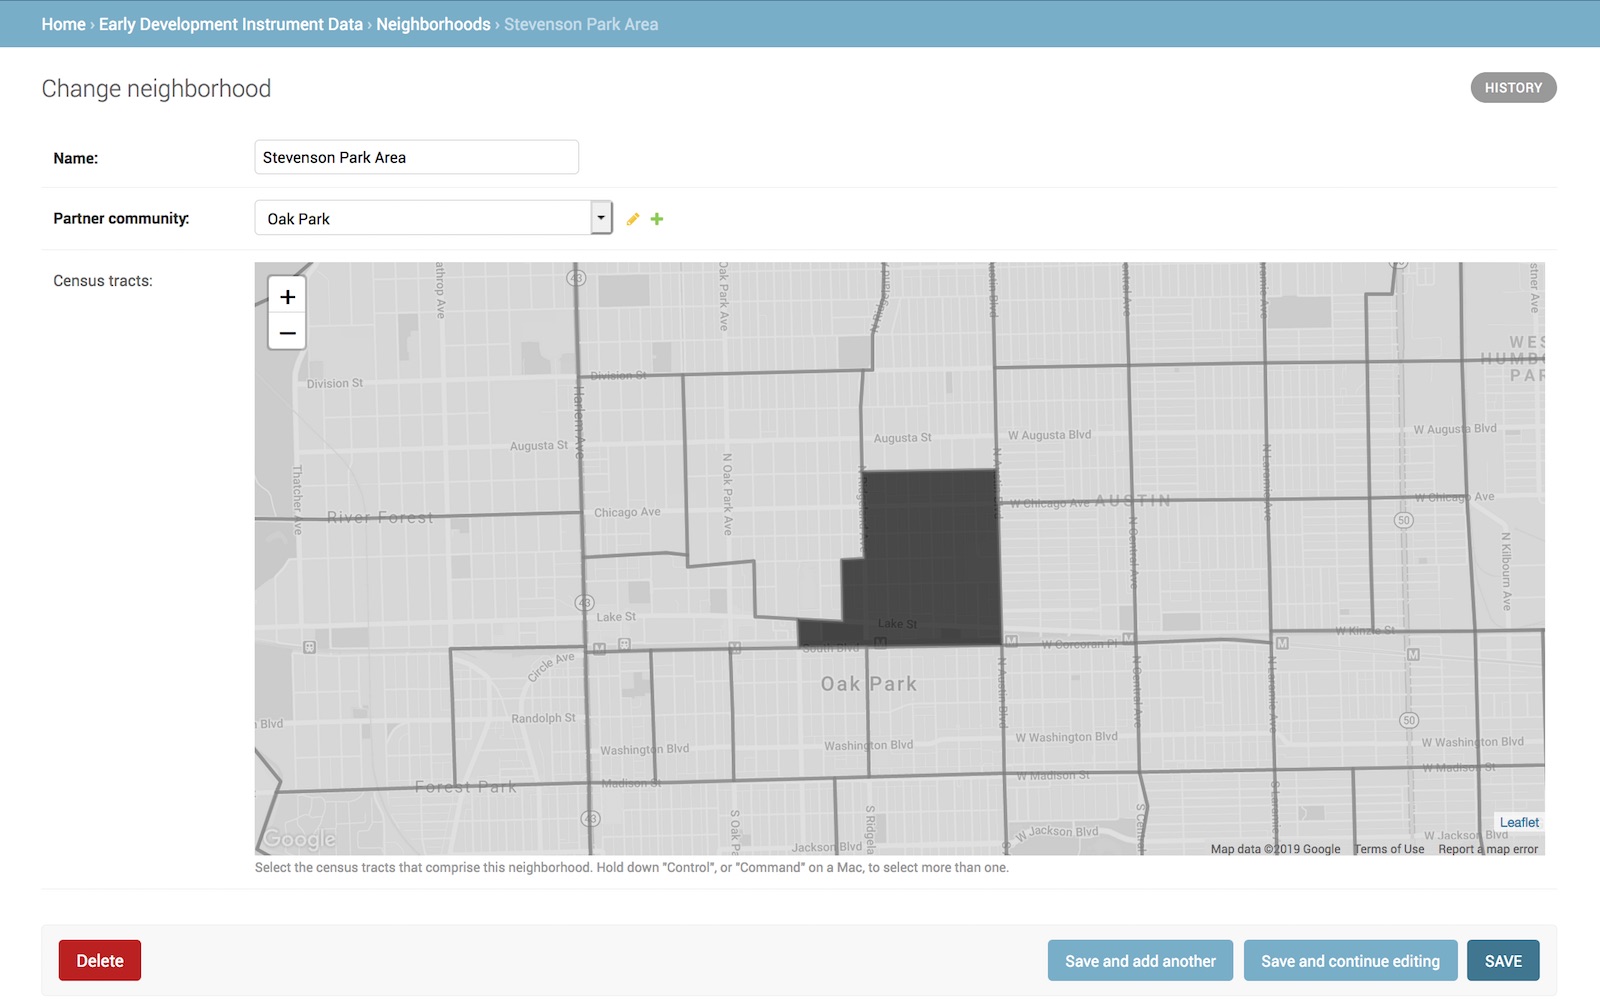 Early Development Instrument - Content management system for defining local neighborhoods